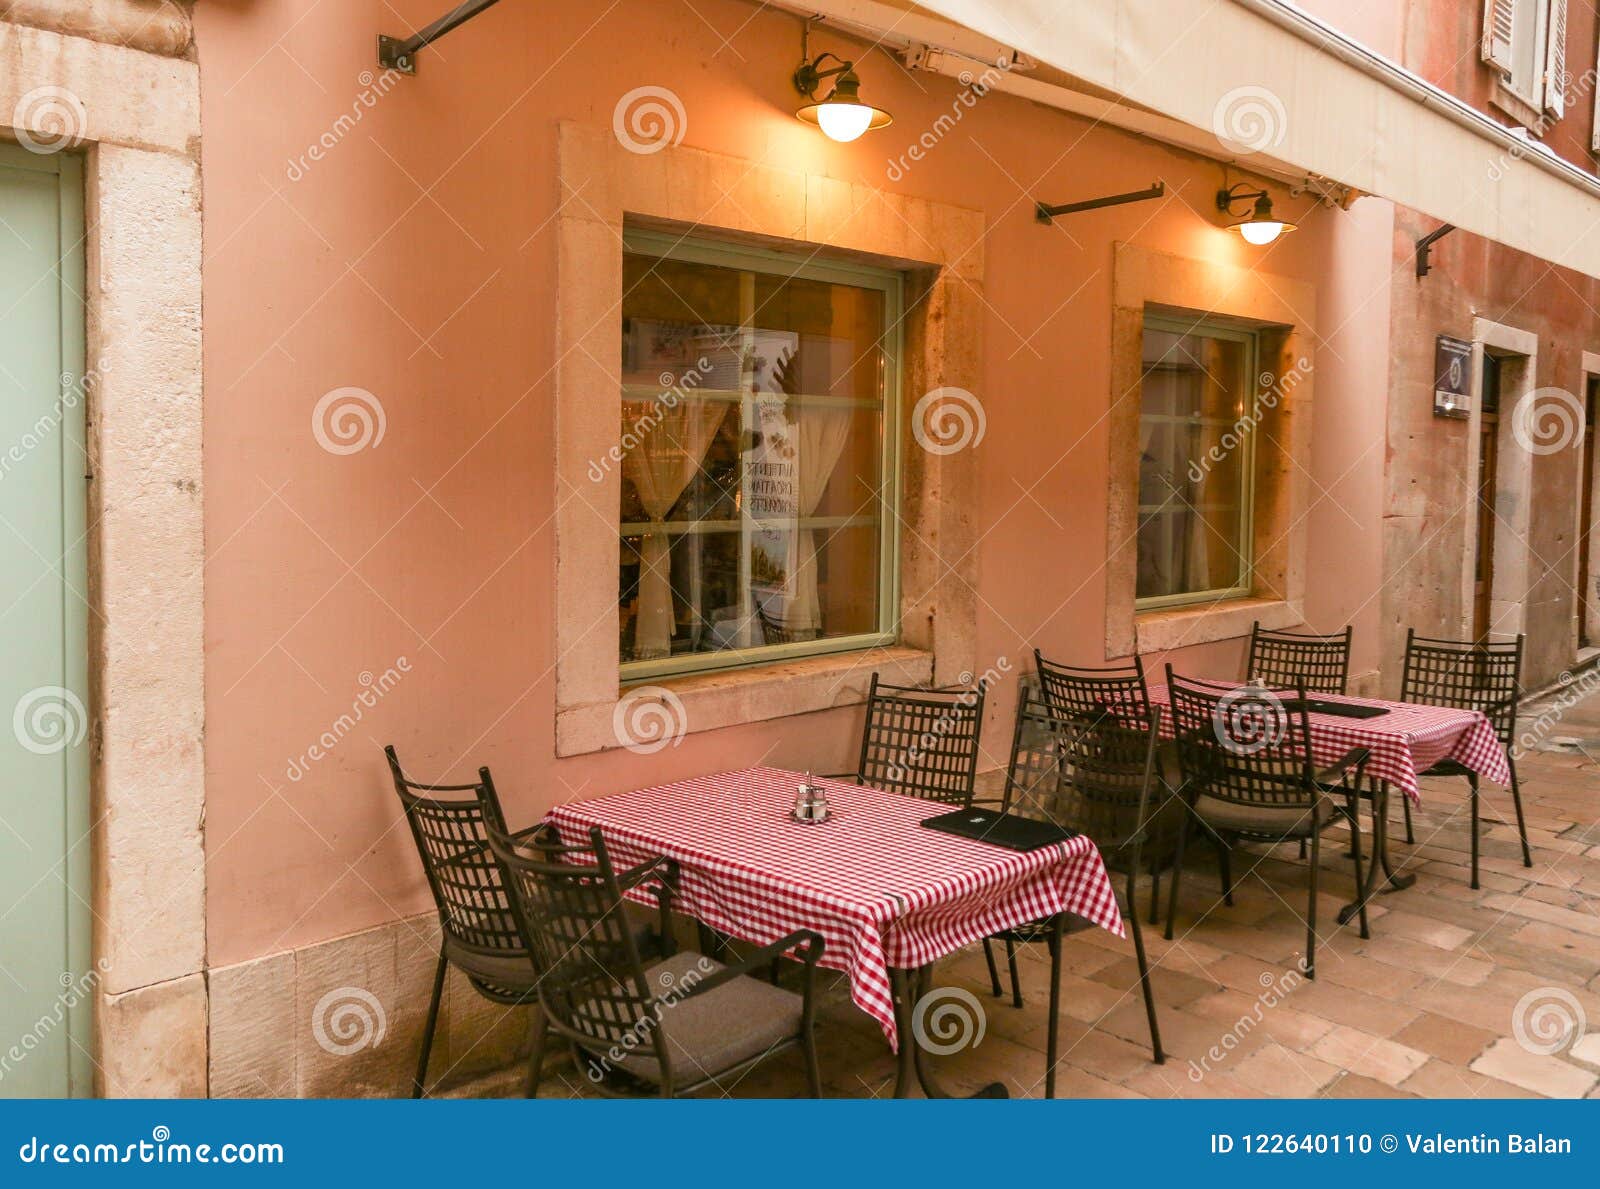 Zadar restaurant stock photo. Image of town, vacation - 122640110